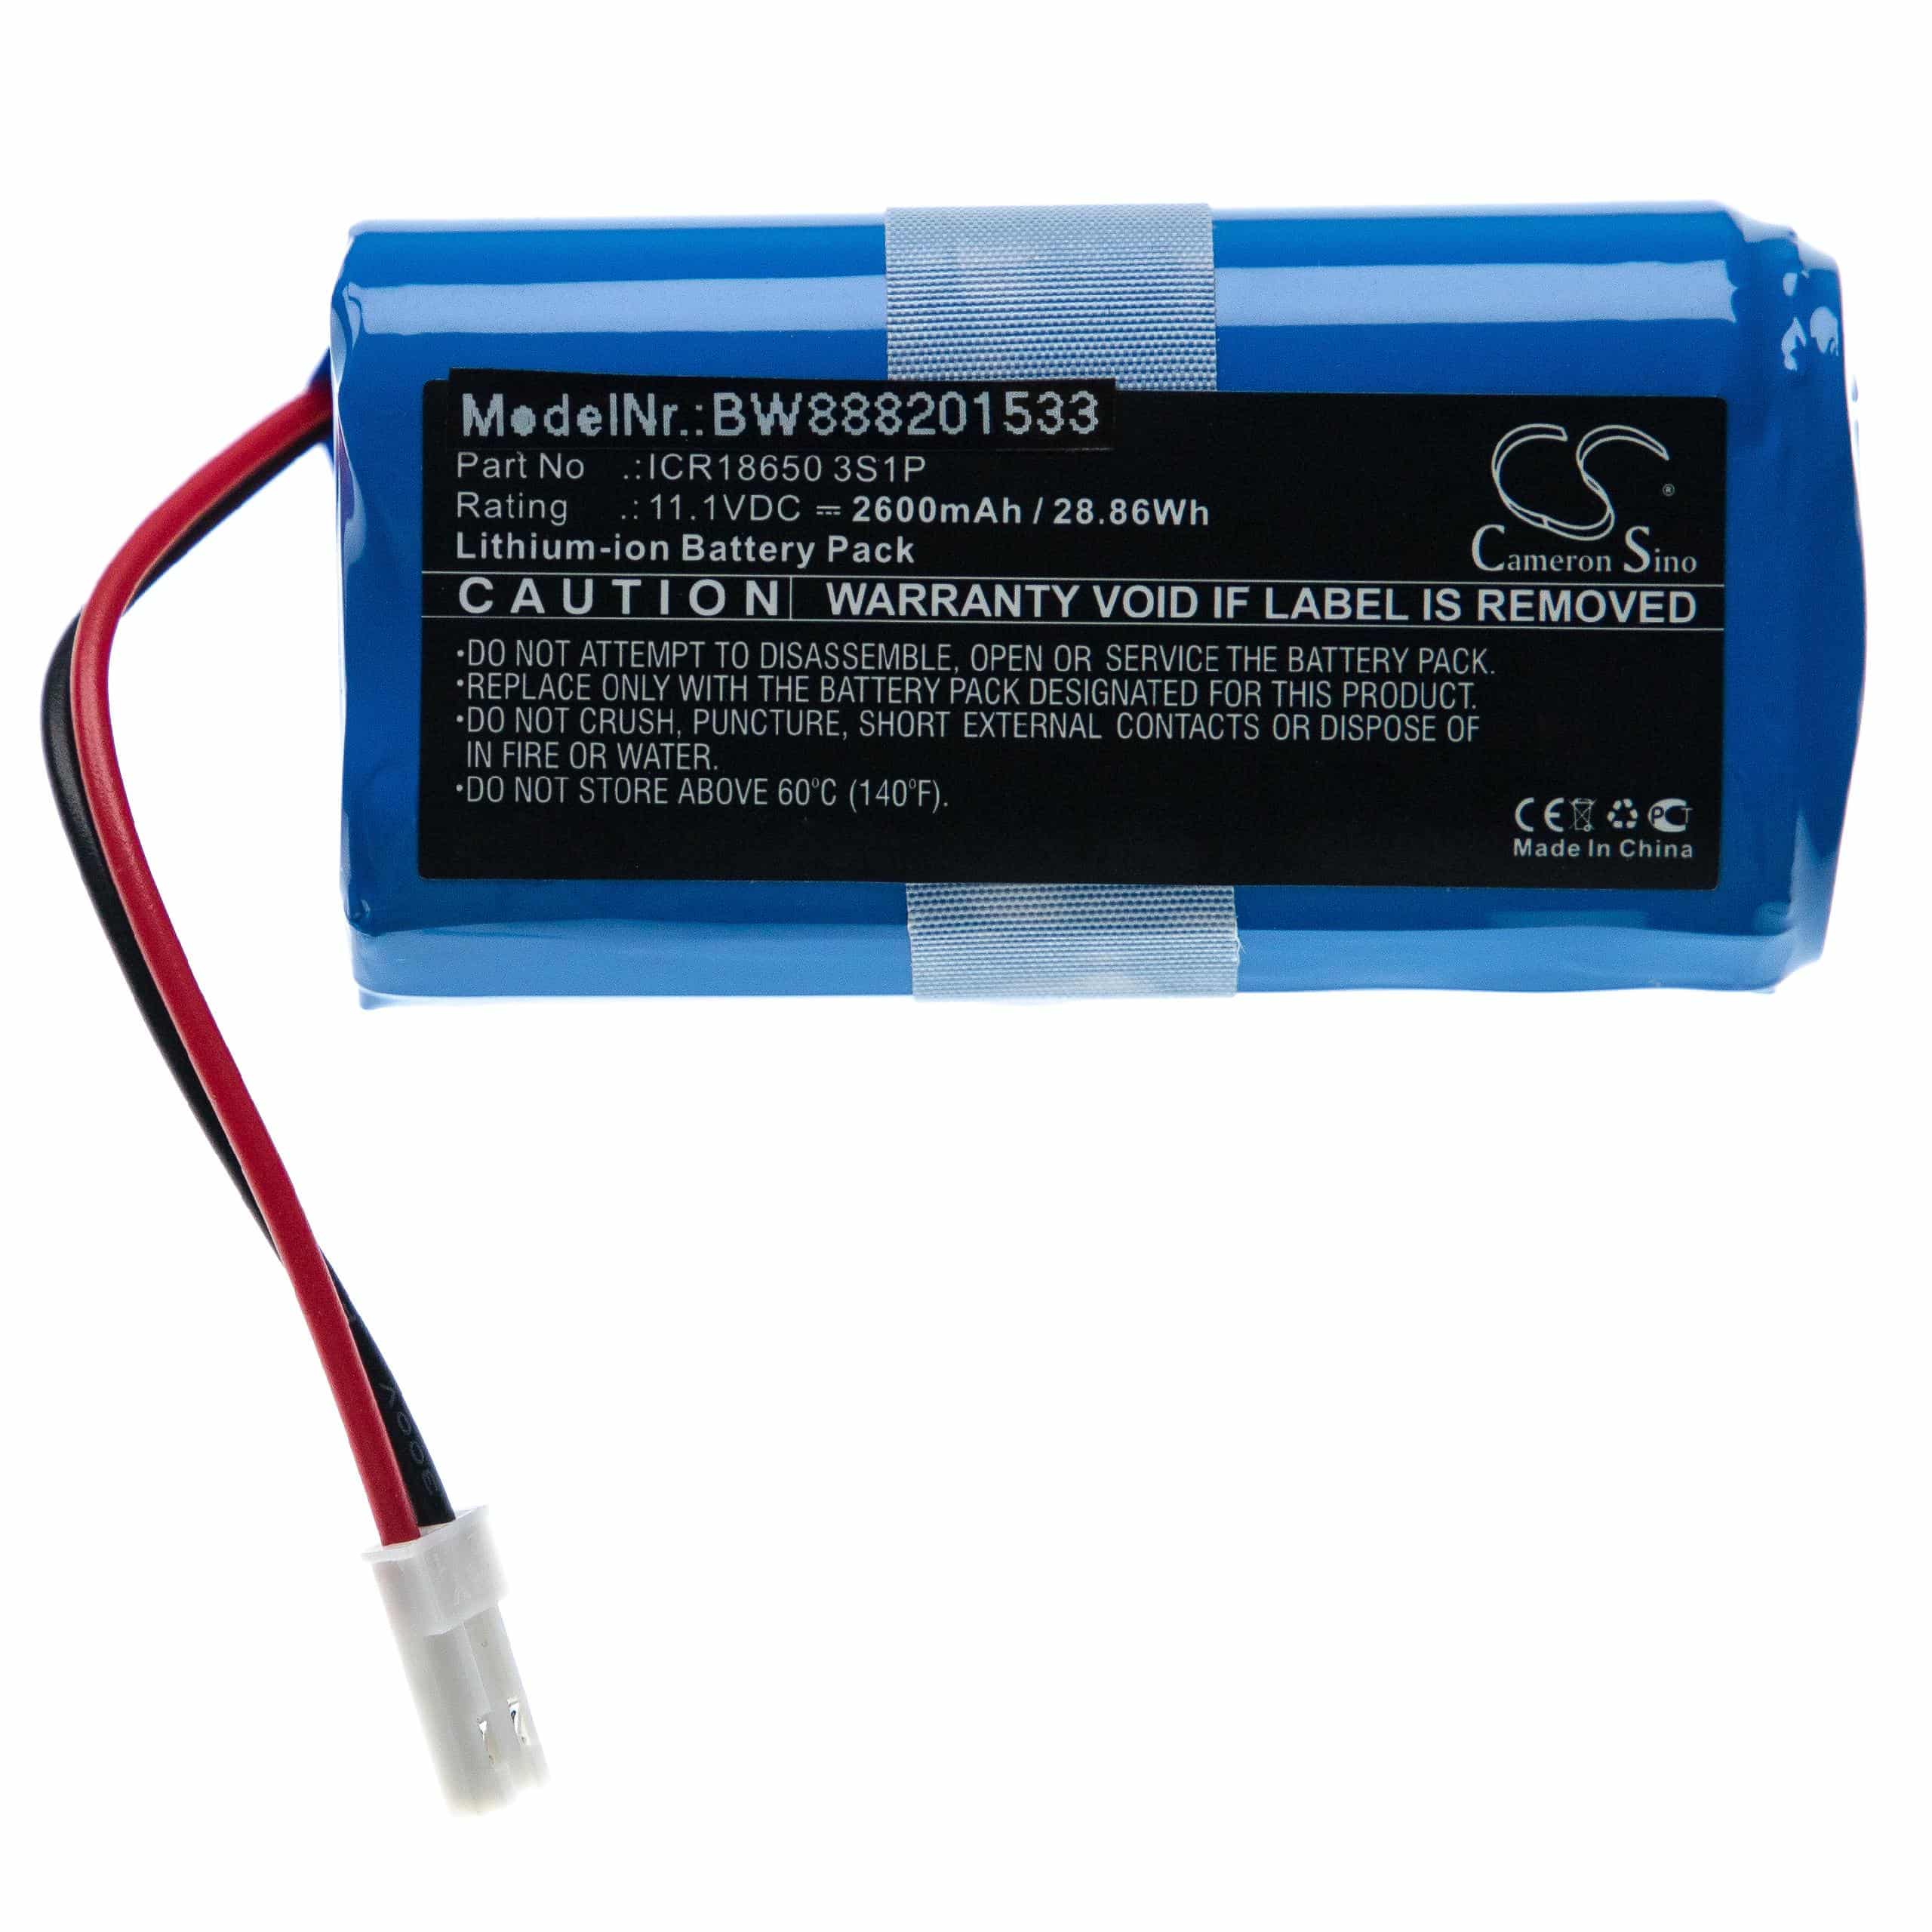 Battery Replacement for Ecovacs ICR18650 3S1P for - 2600mAh, 11.1V, Li-Ion